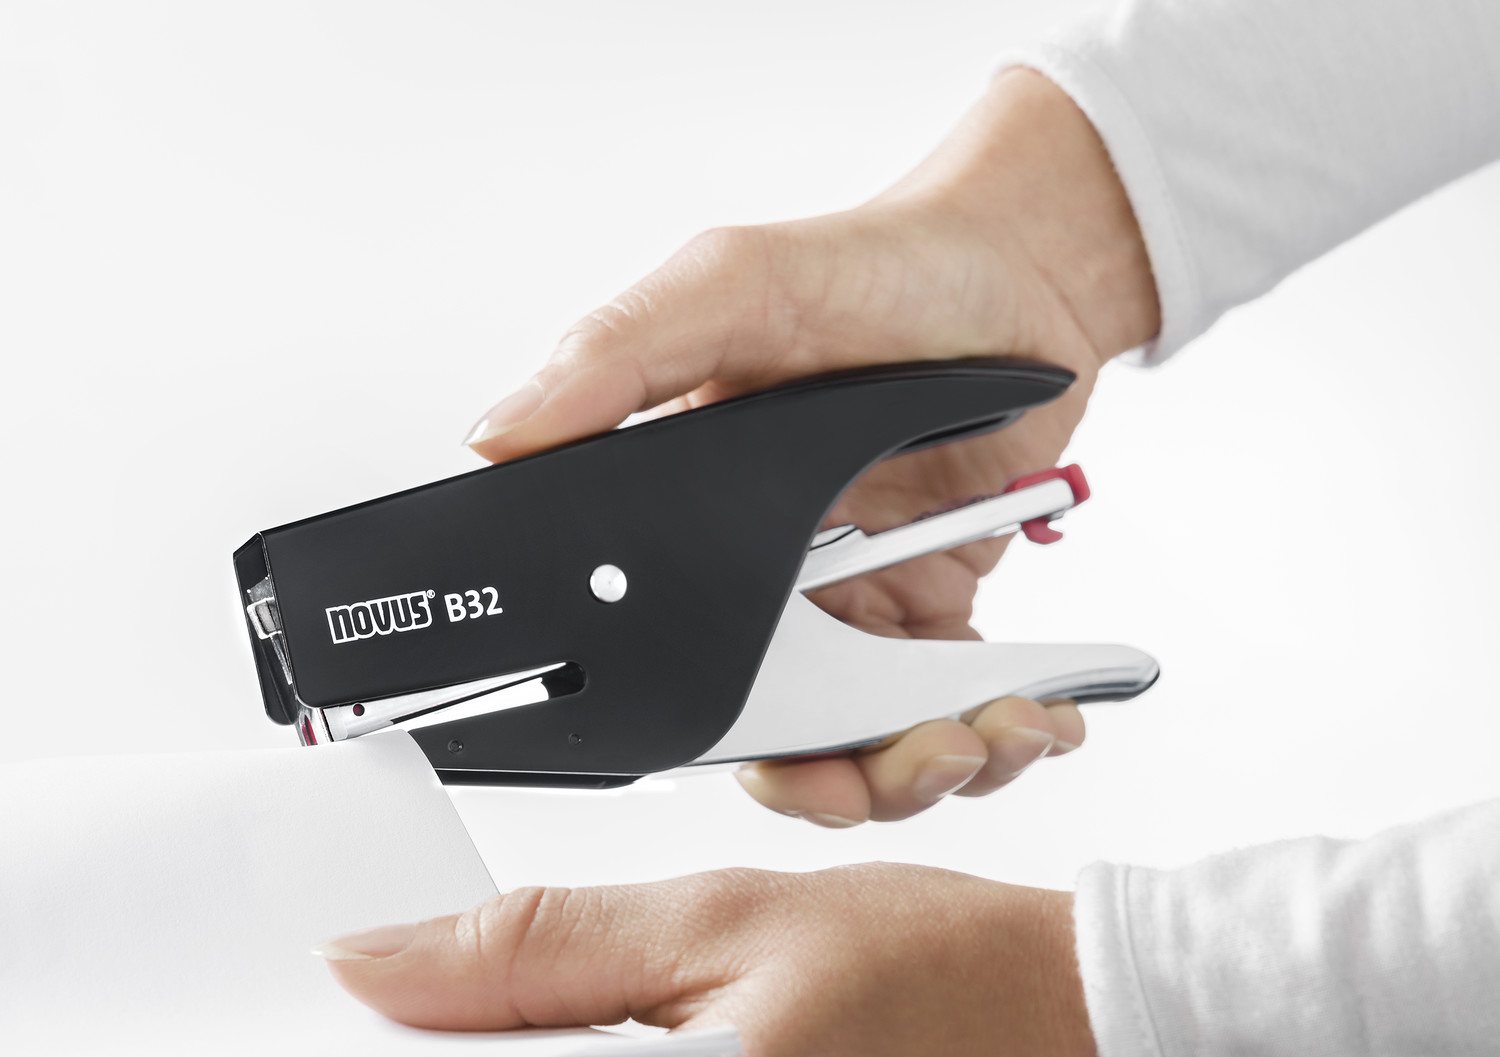 Ergonomic: the B32 fits comfortably in your hand and makes stapling easy and hassle-free.